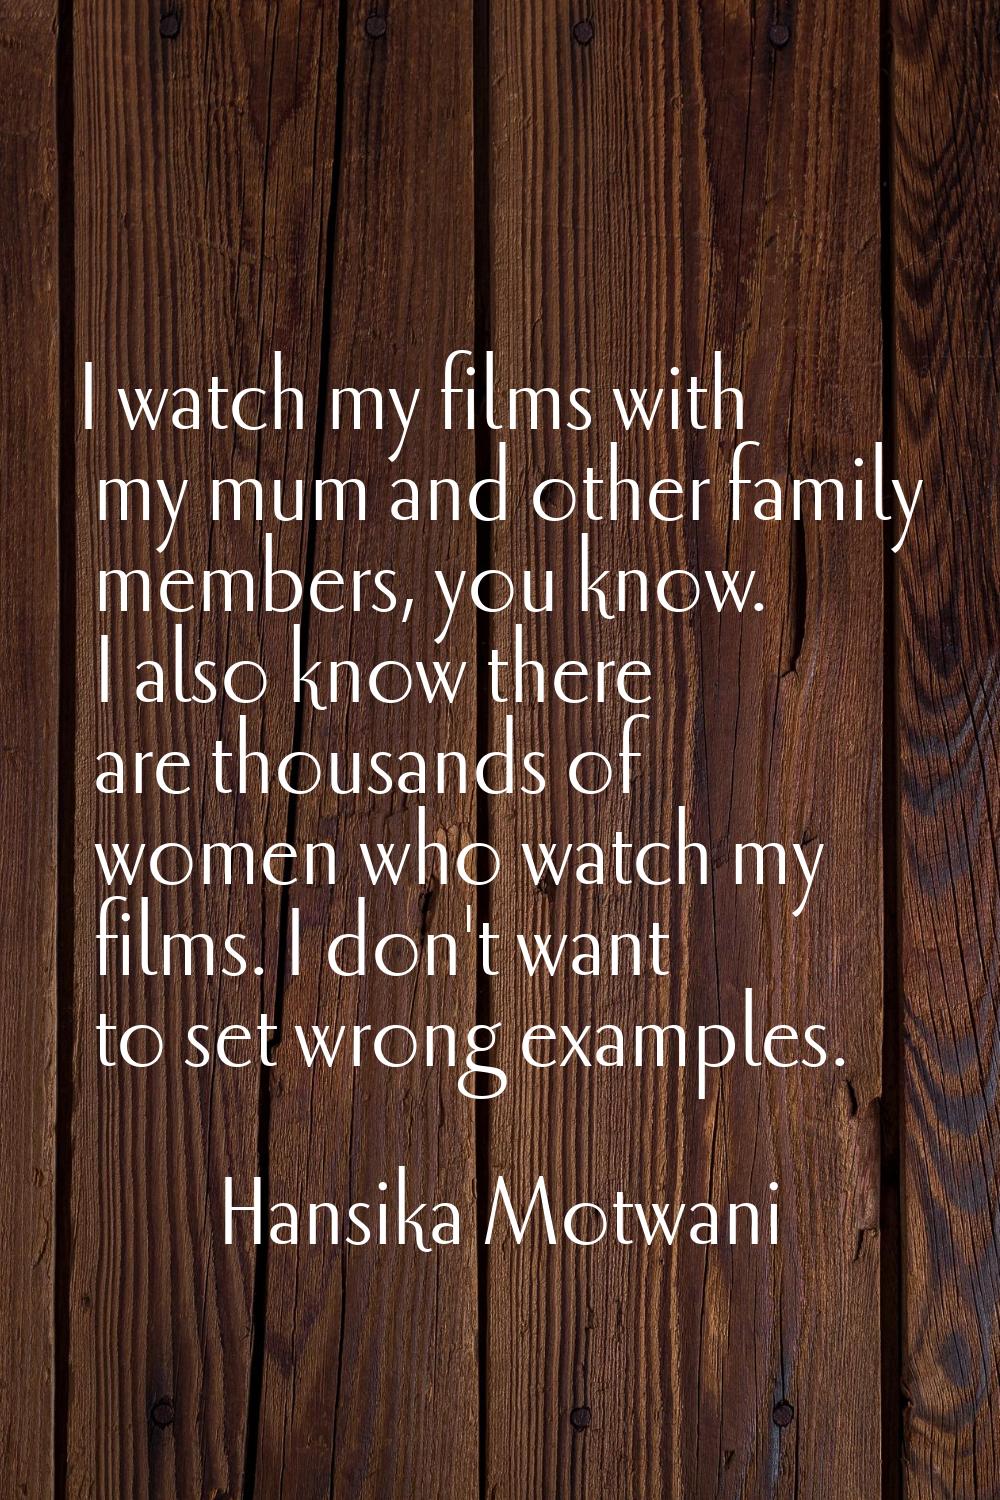 I watch my films with my mum and other family members, you know. I also know there are thousands of